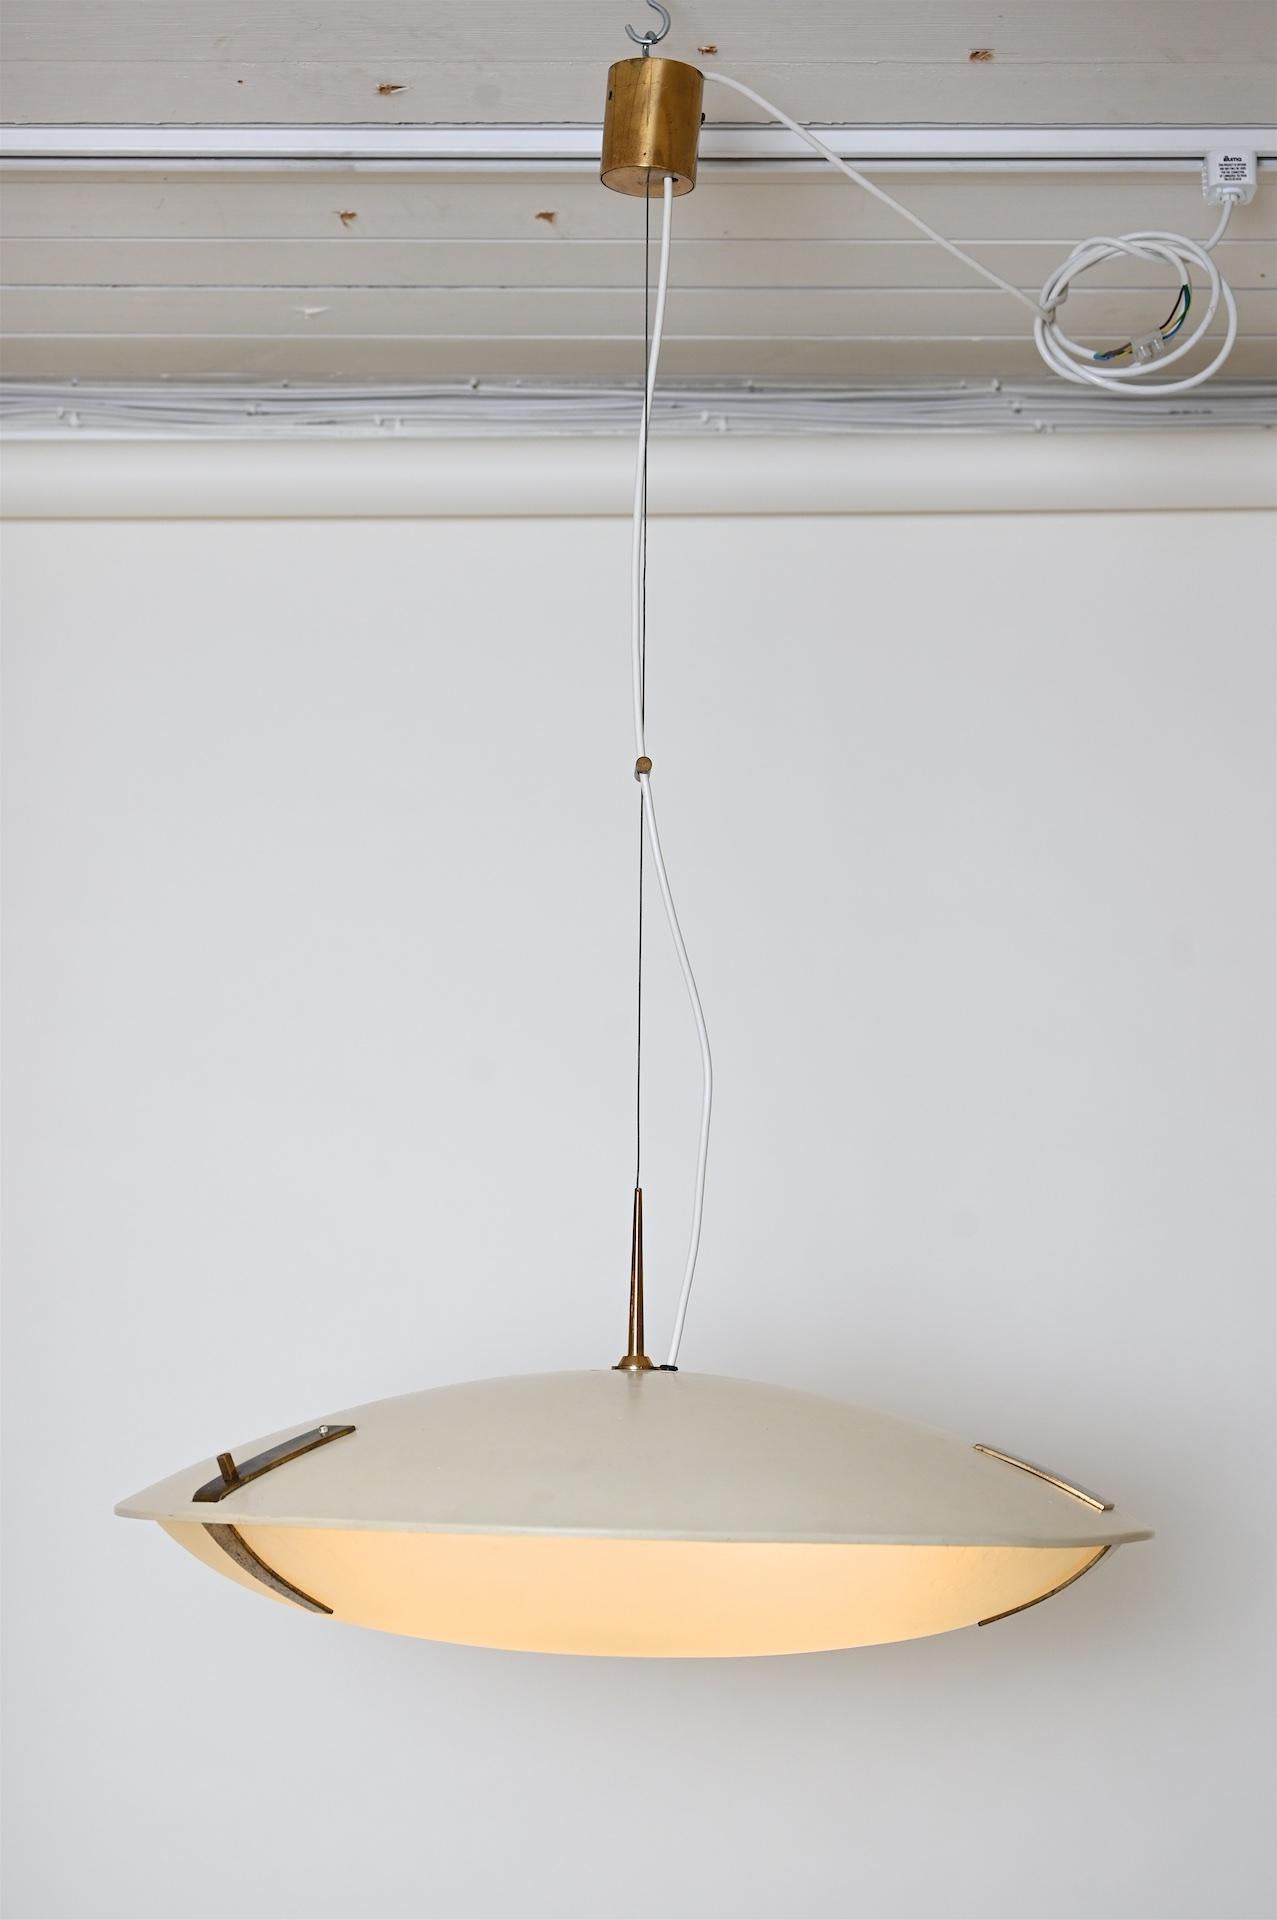 Classic Stilnovo ceiling light. Suspended on steel wire. 

The shape; reminiscent of a flying saucer. 

Acid-etched glass painted aluminium, brass.

Manufactured by Stilnovo, Milan, Italy c1960

Pair available. 

Re wired. Drop can be